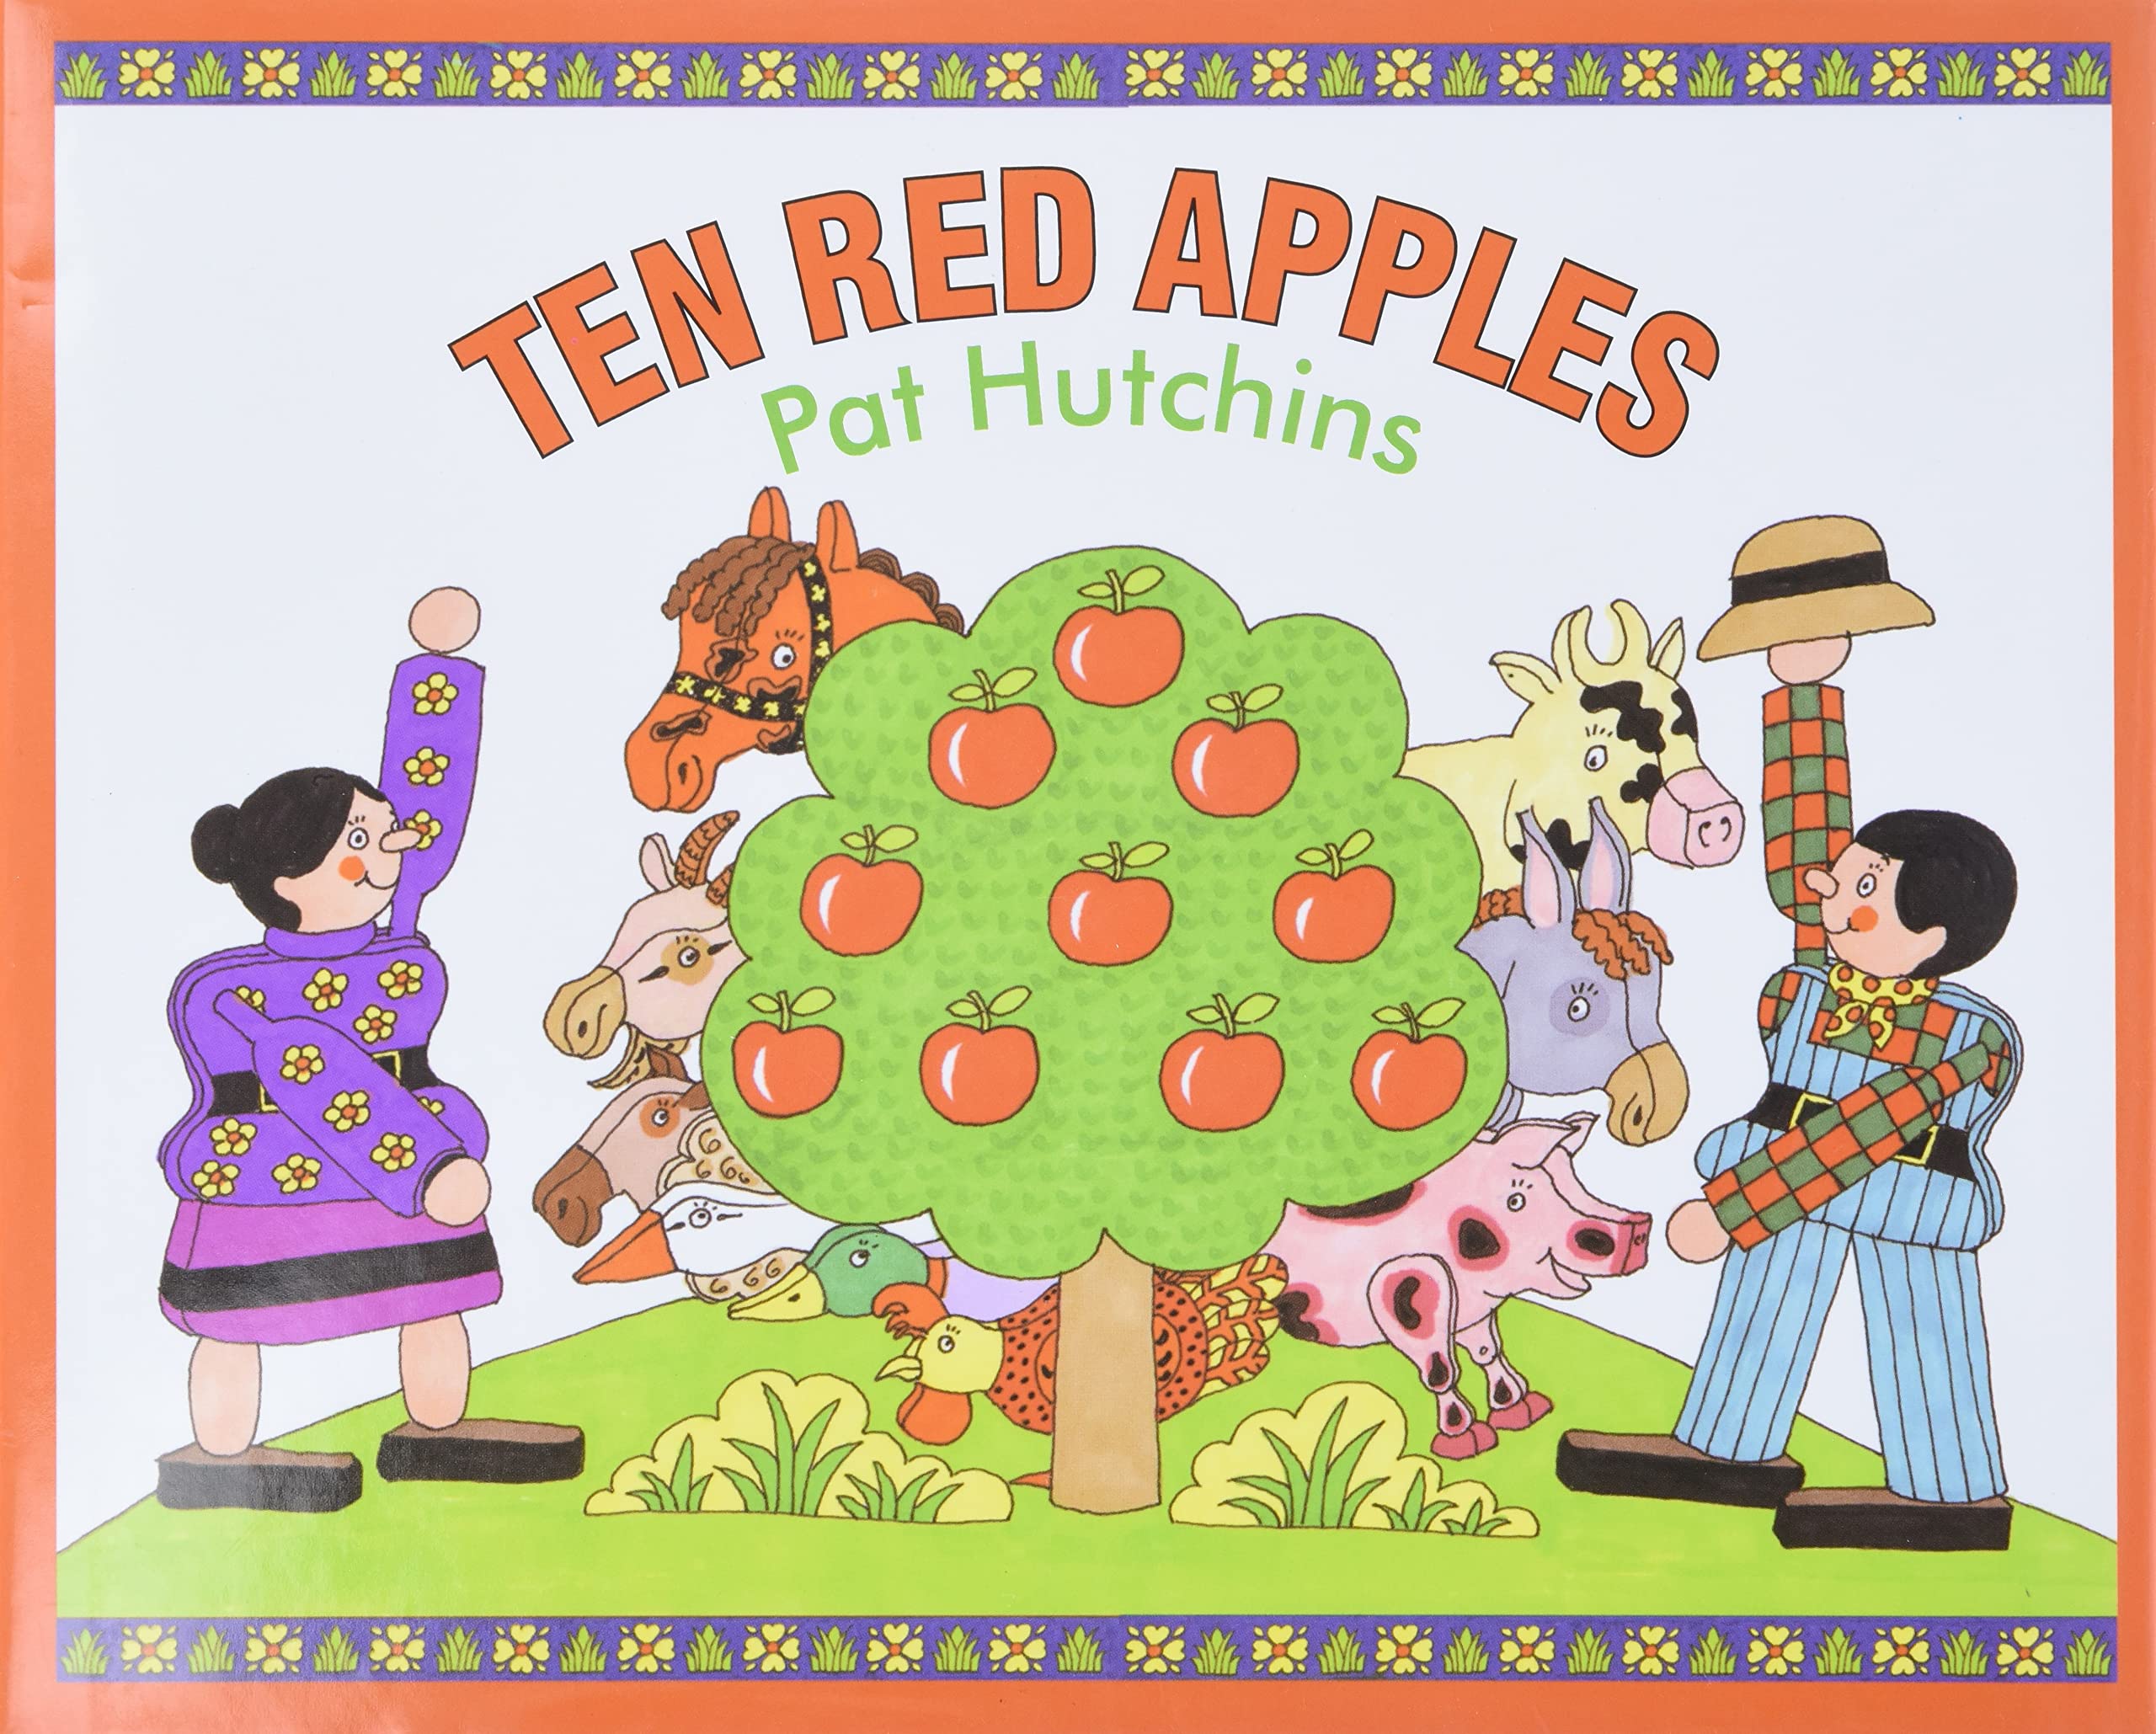 speech and language teaching concepts for Ten Red Apples in speech therapy​ ​